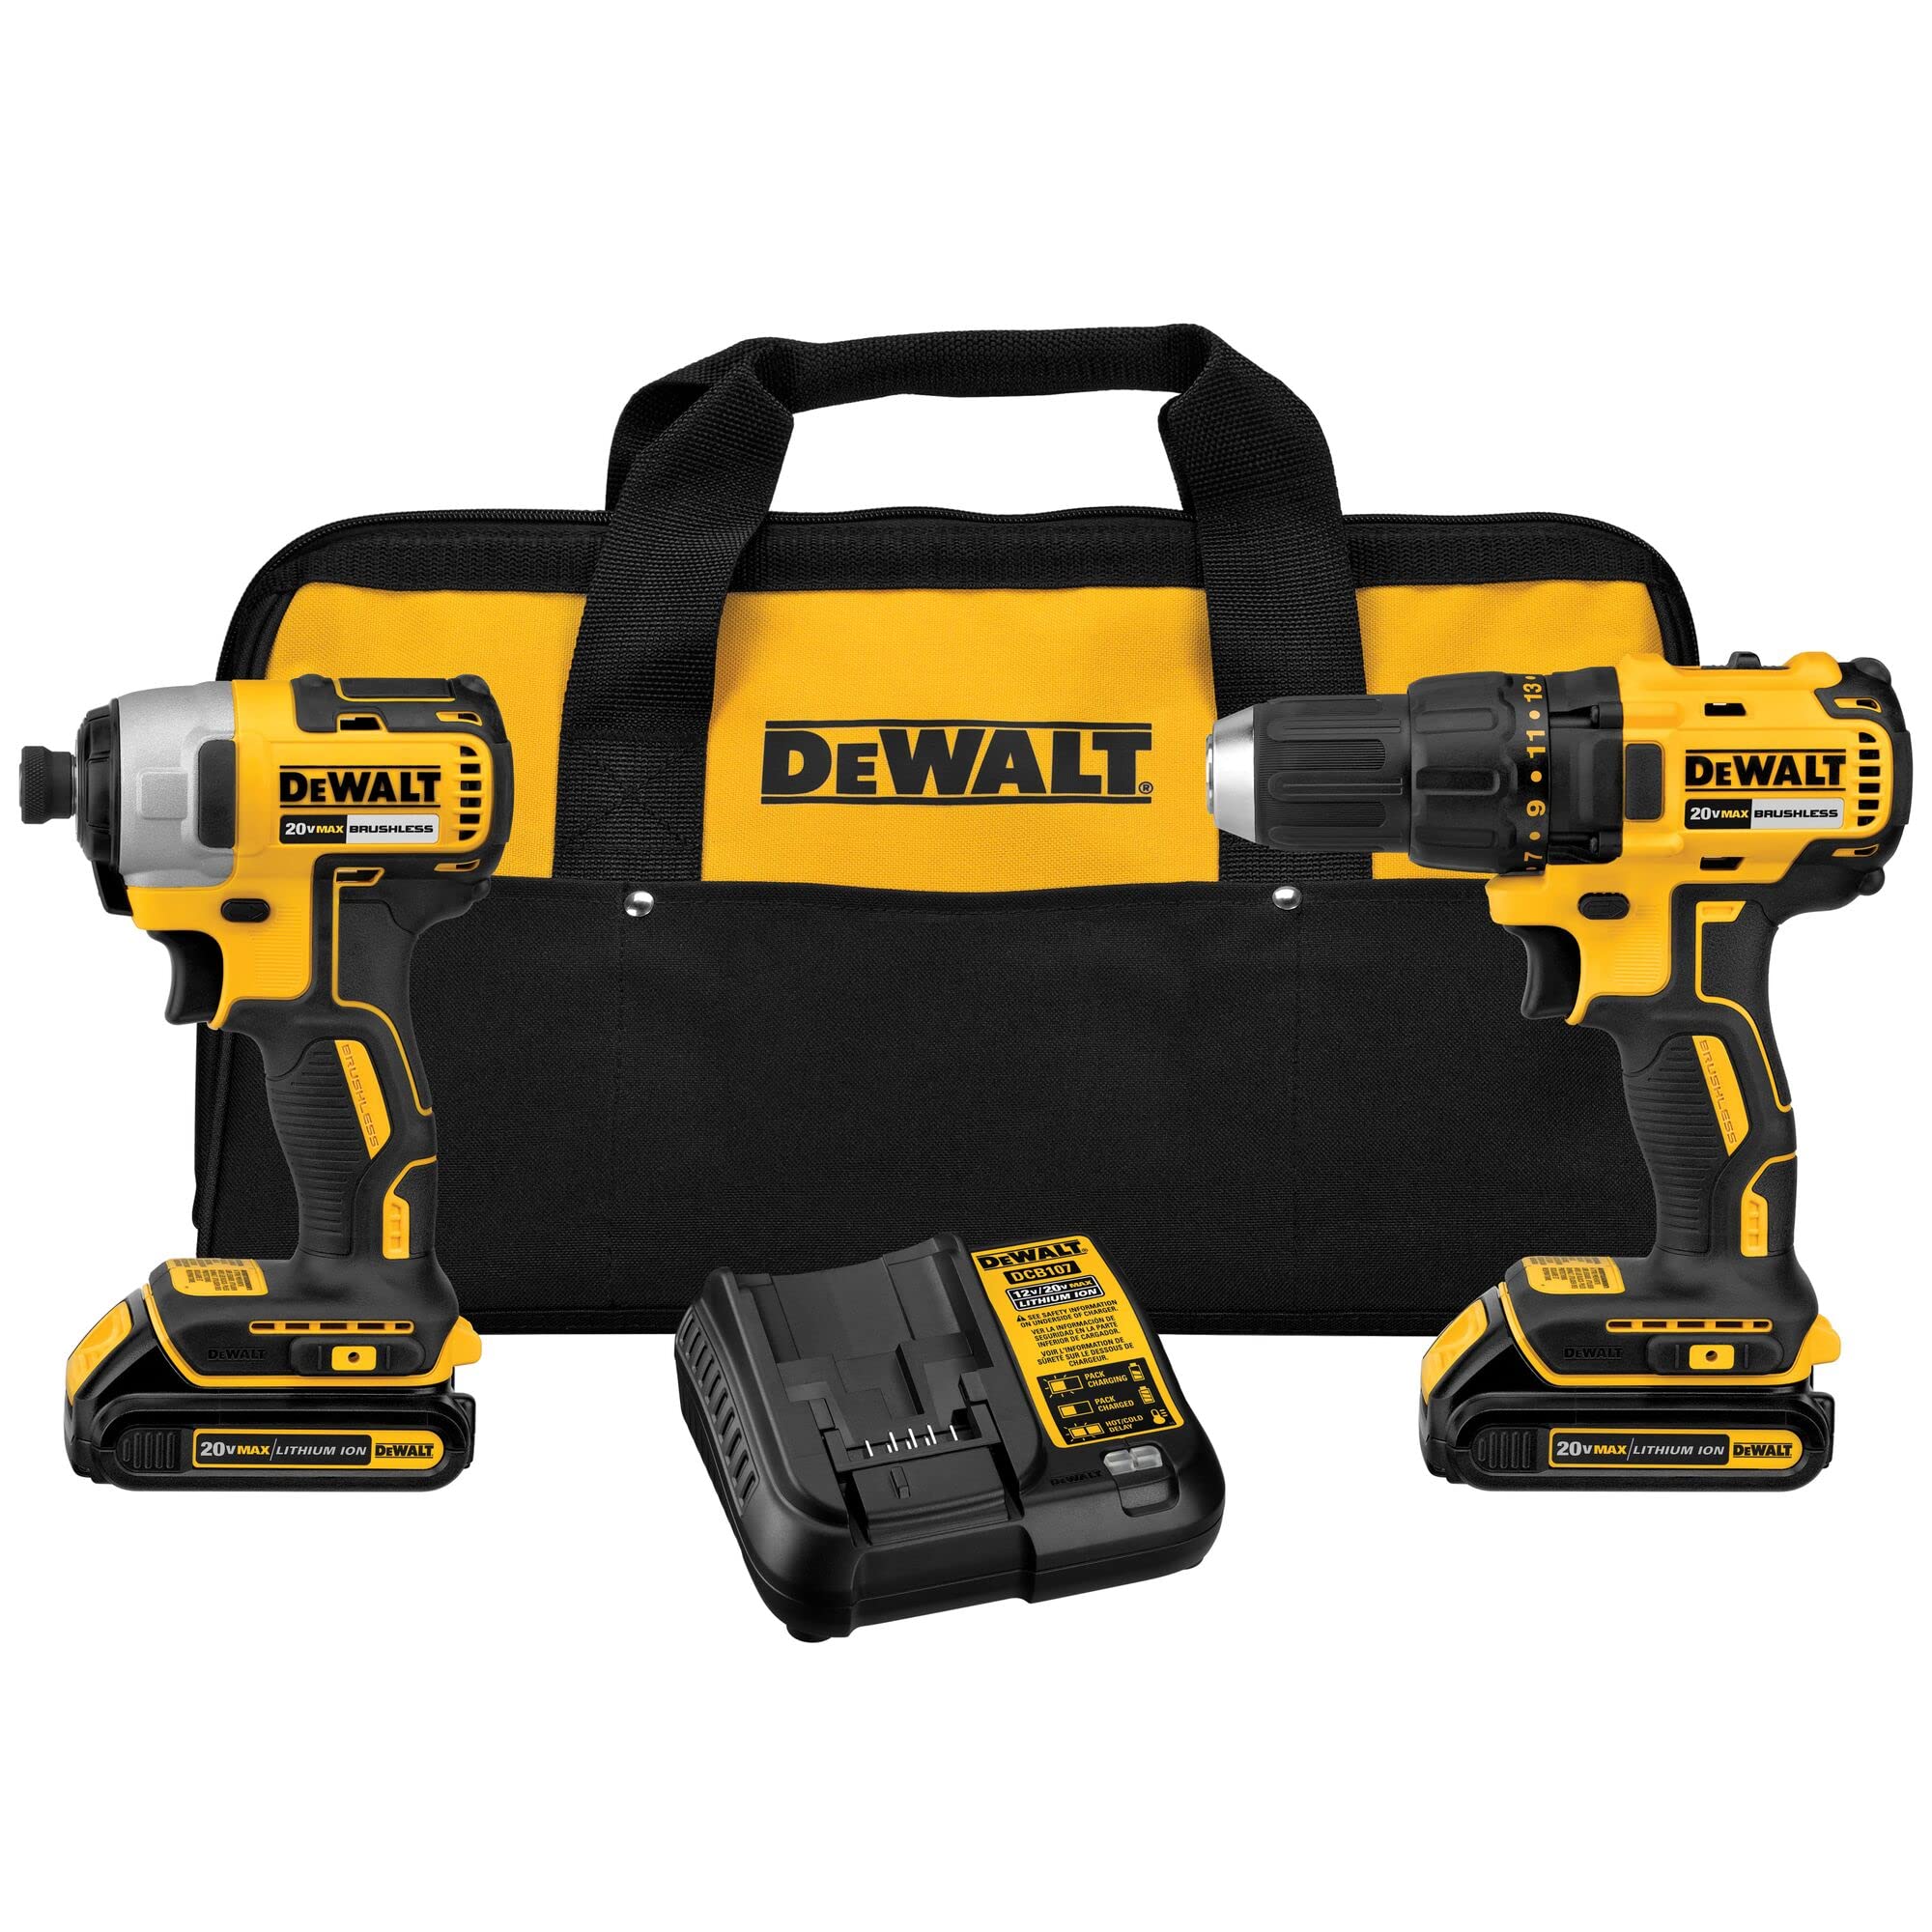 Amazon.com: DEWALT 20V MAX Brushless Drill, Impact Driver, Power Tool Combo Kit,w/ 2 Batteries and Charger Included $204.00